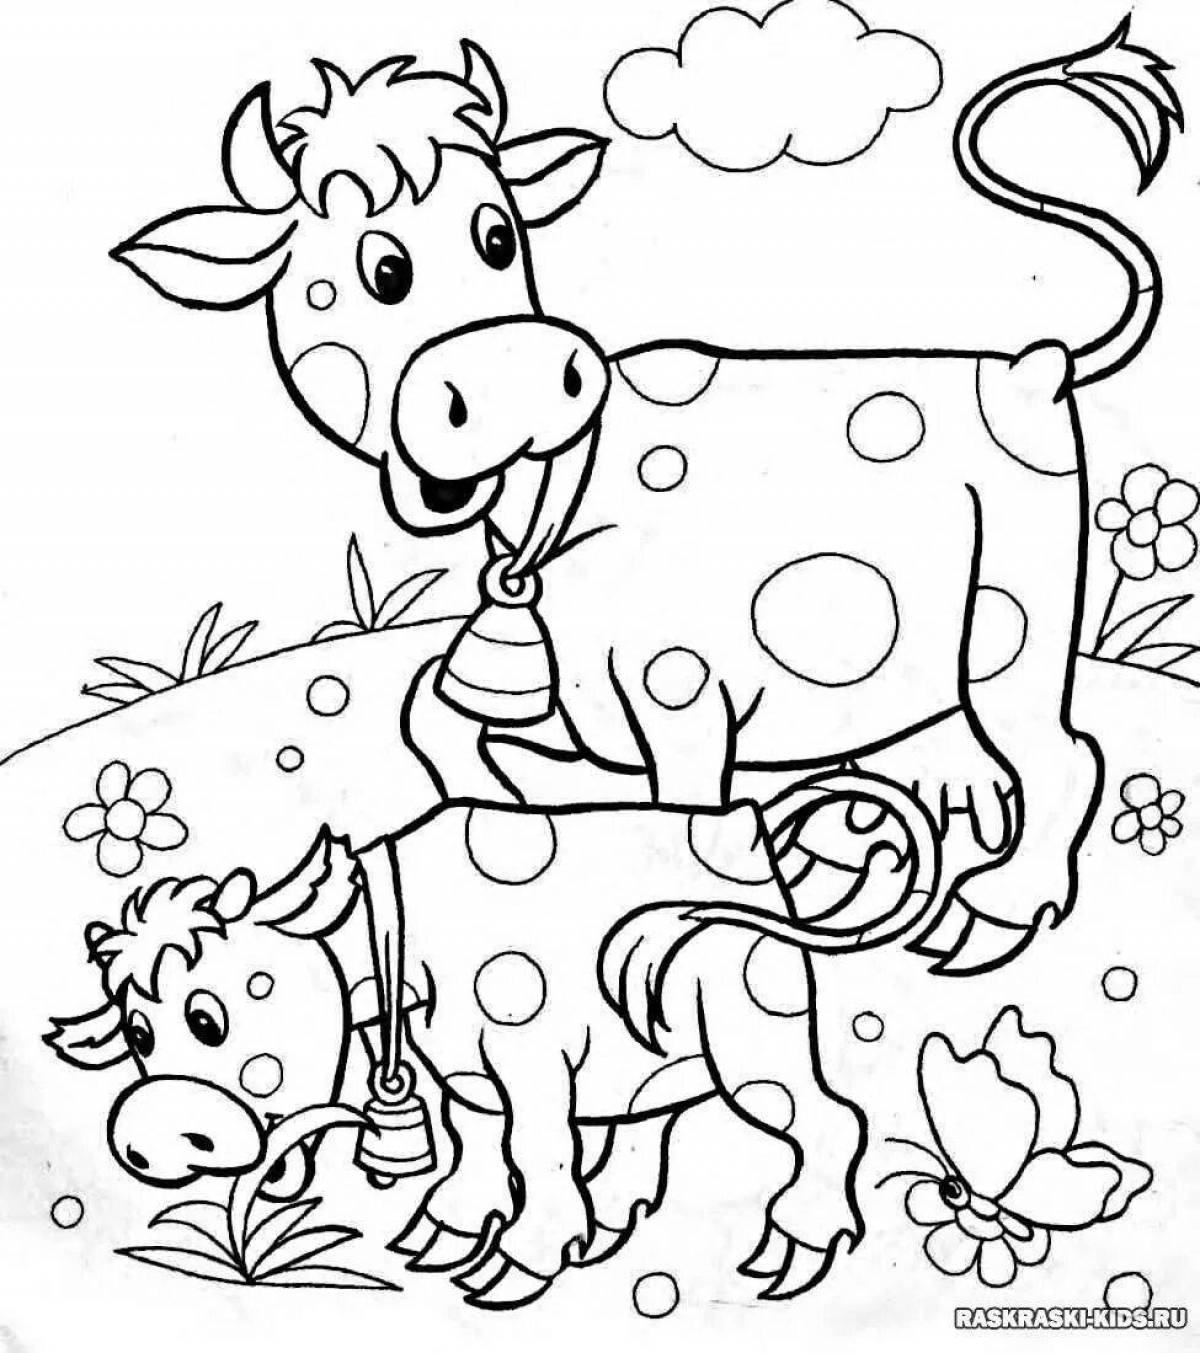 Sweet calf coloring page for kids